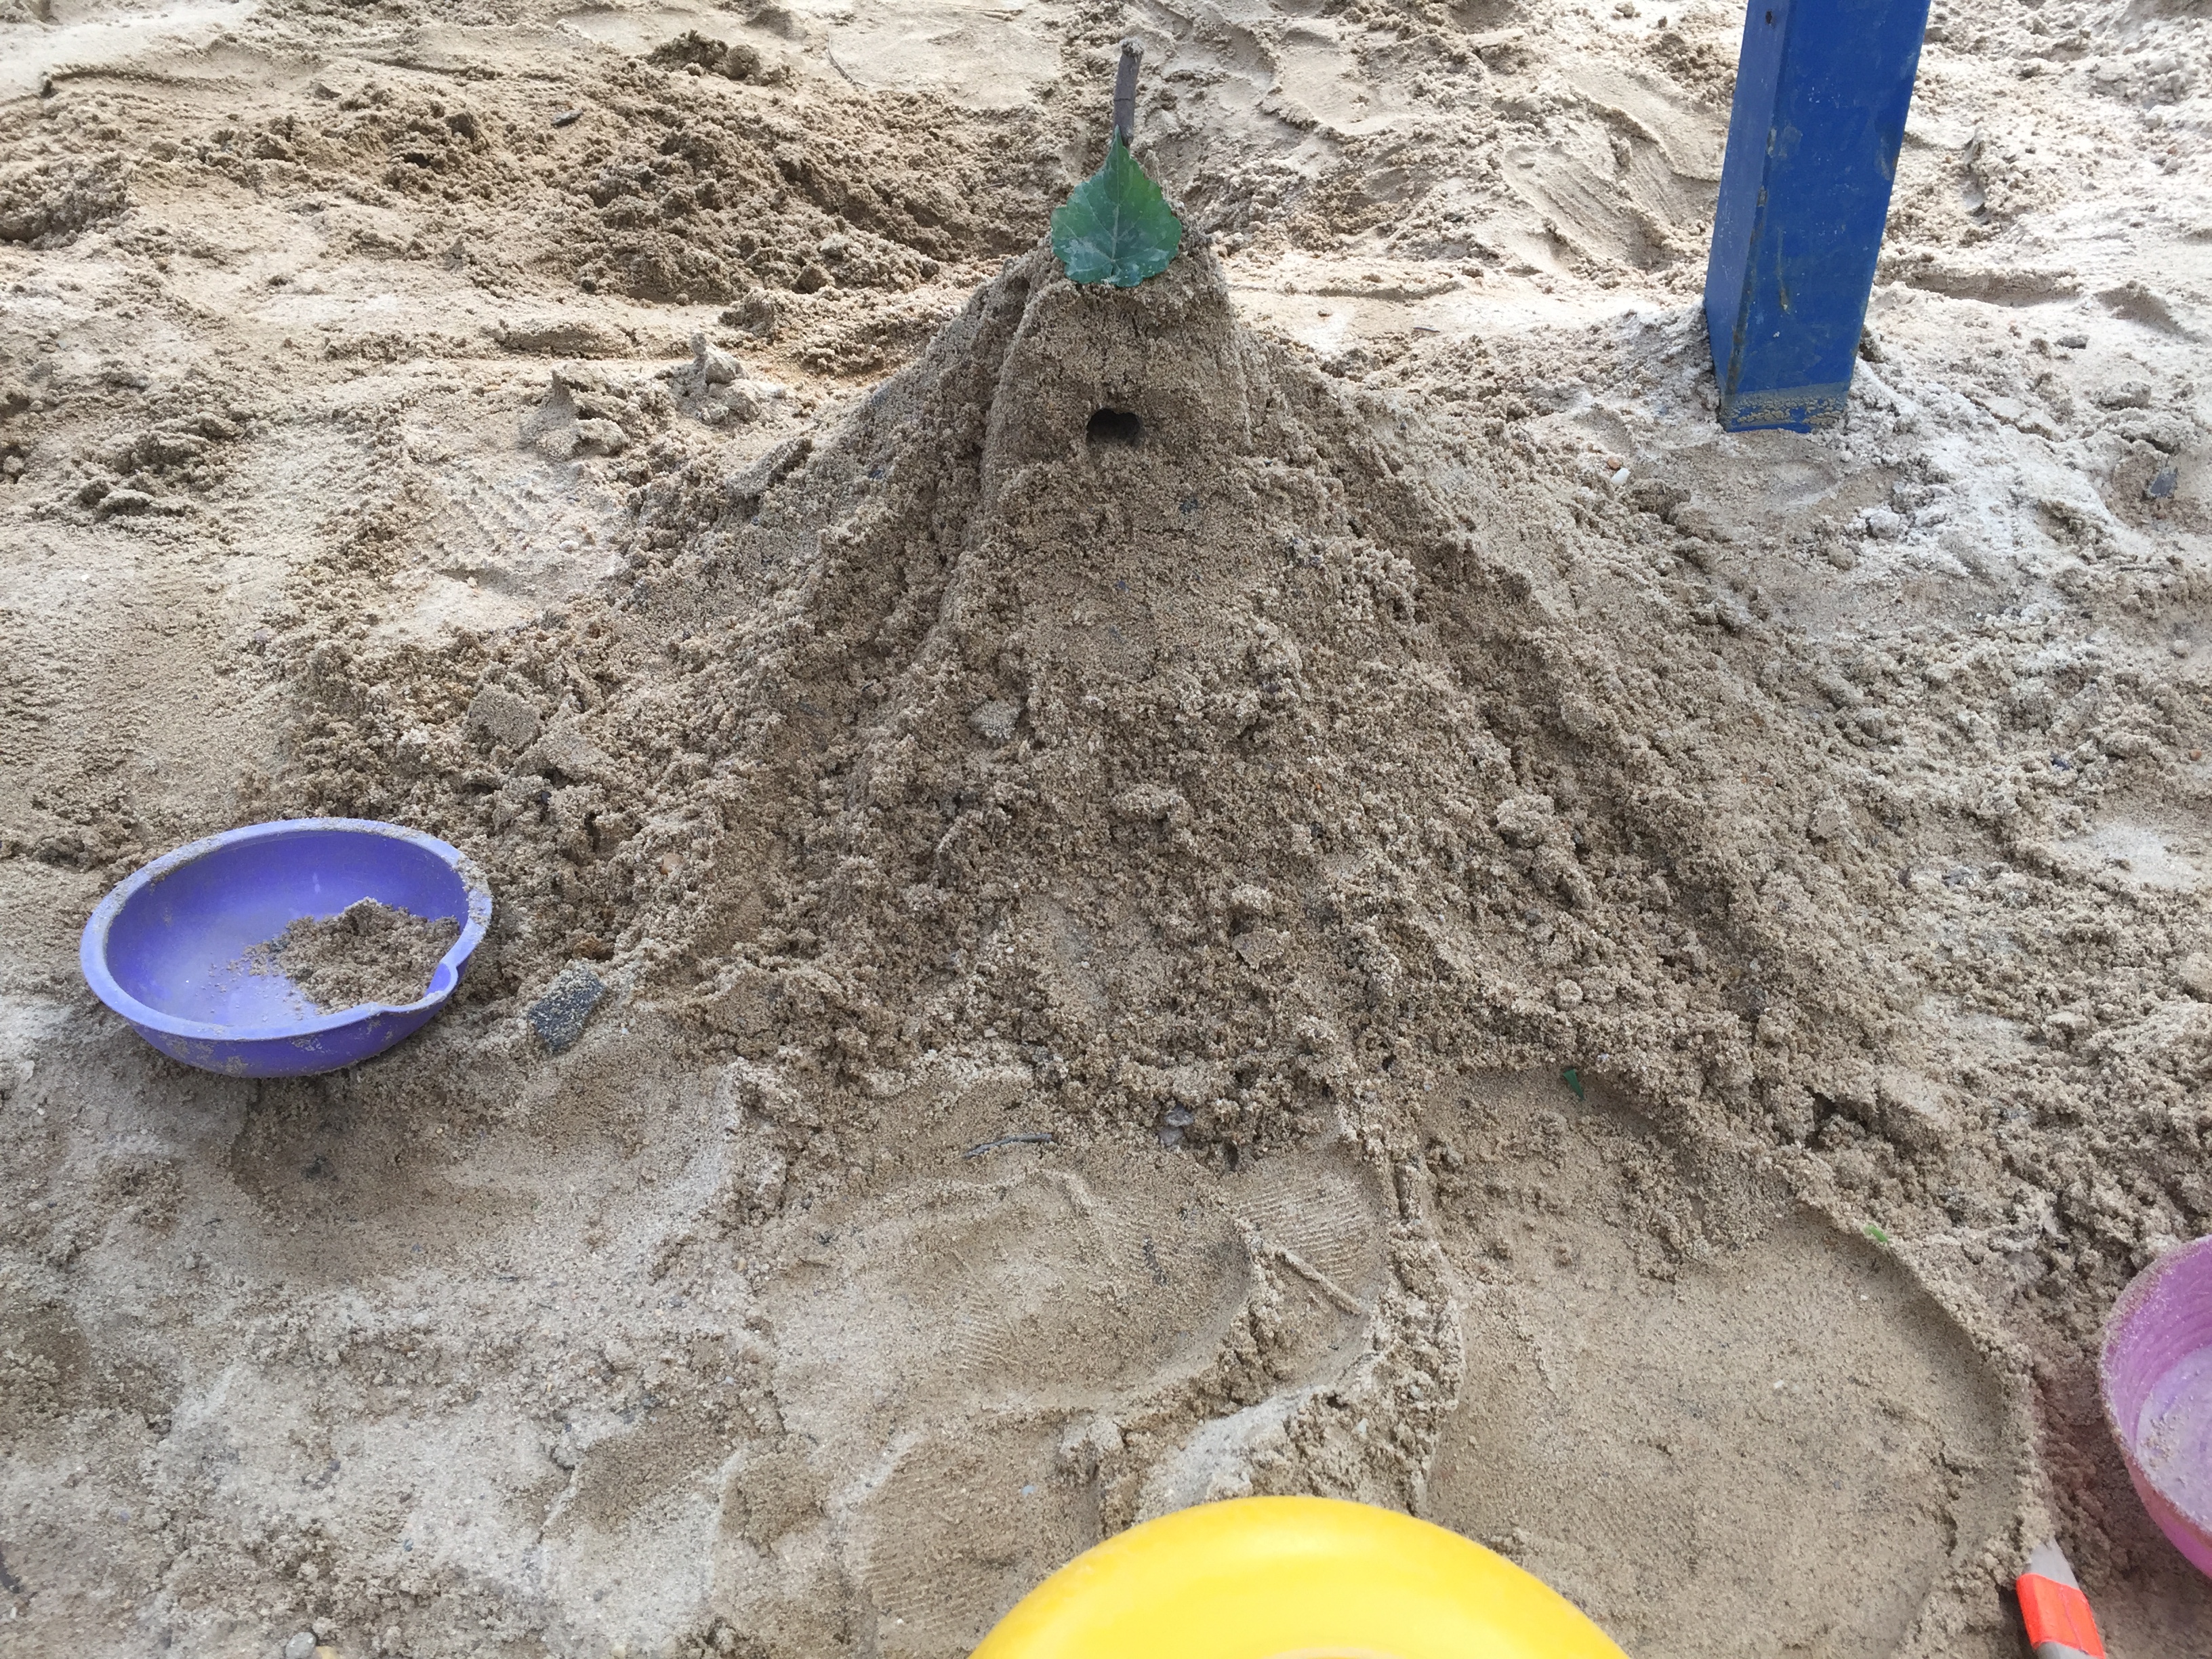 Sand "castle" with leaf at top.